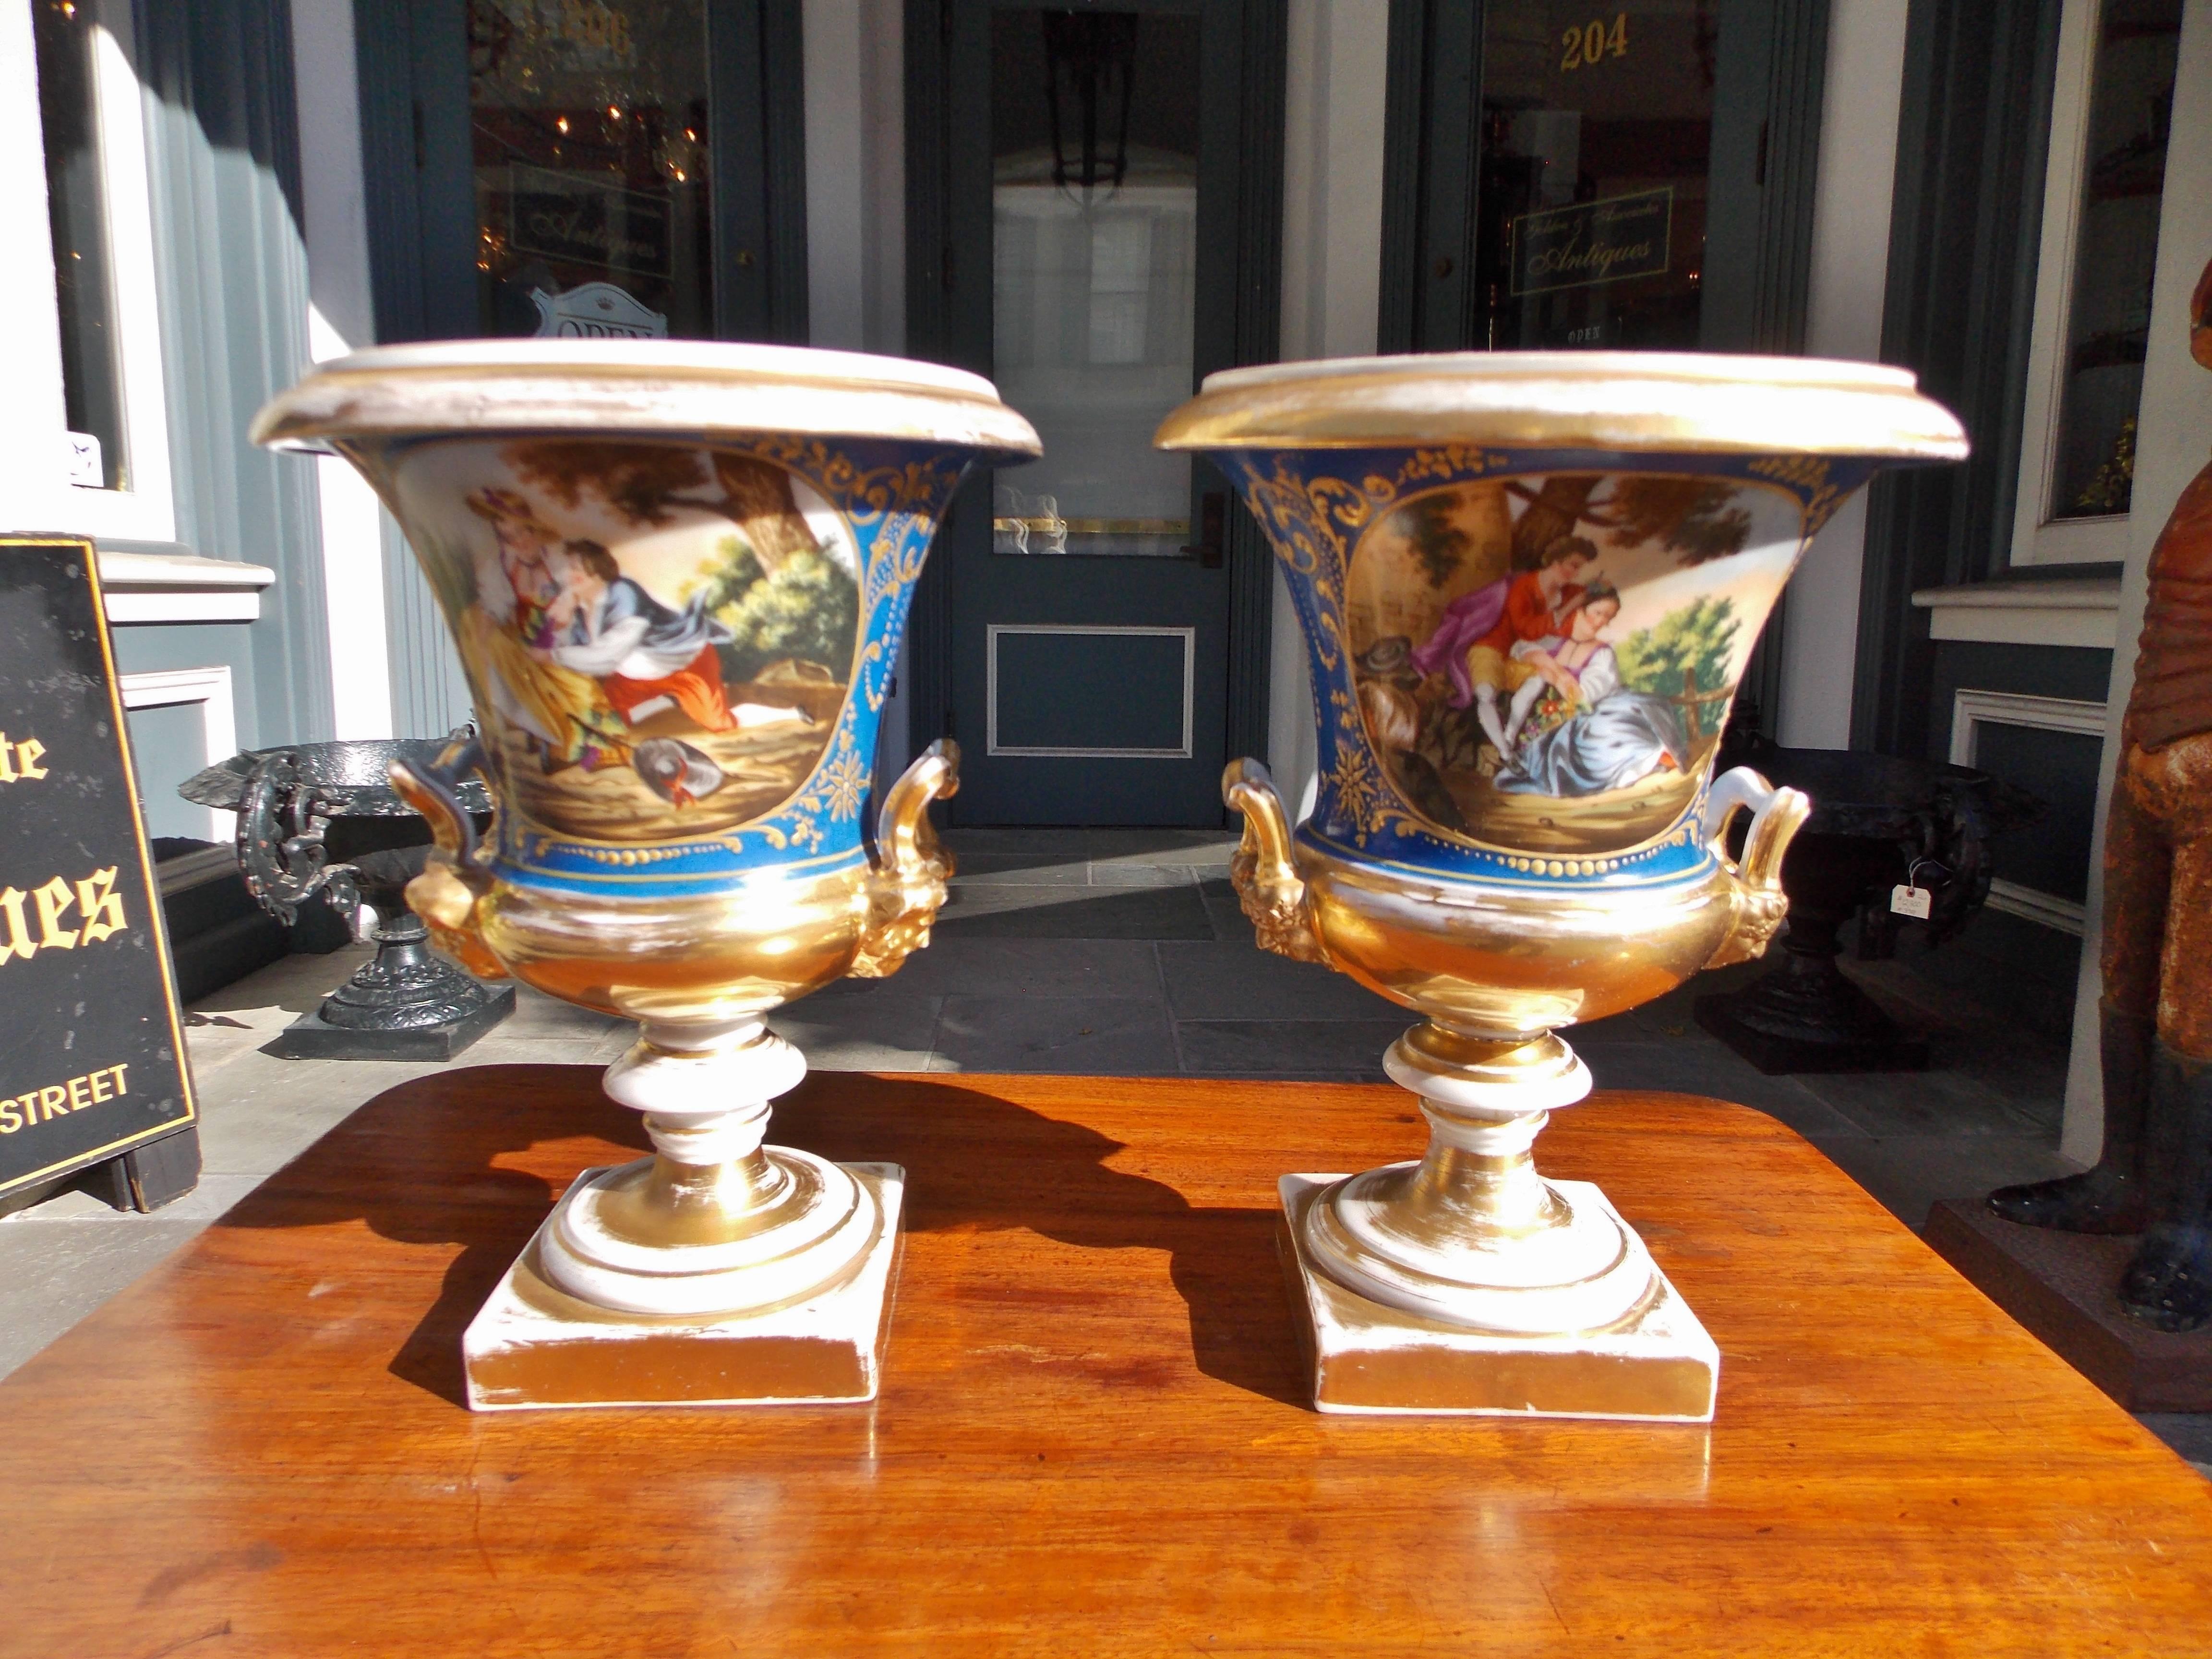 Pair of French Old Paris gilt and cobalt blue porcelain mantel urns depicting figural landscape scenes, reverse floral & filigree motif sides, figural side handles, and terminating on bulbous squared gilt plinths, Early 19th Century. 4.5